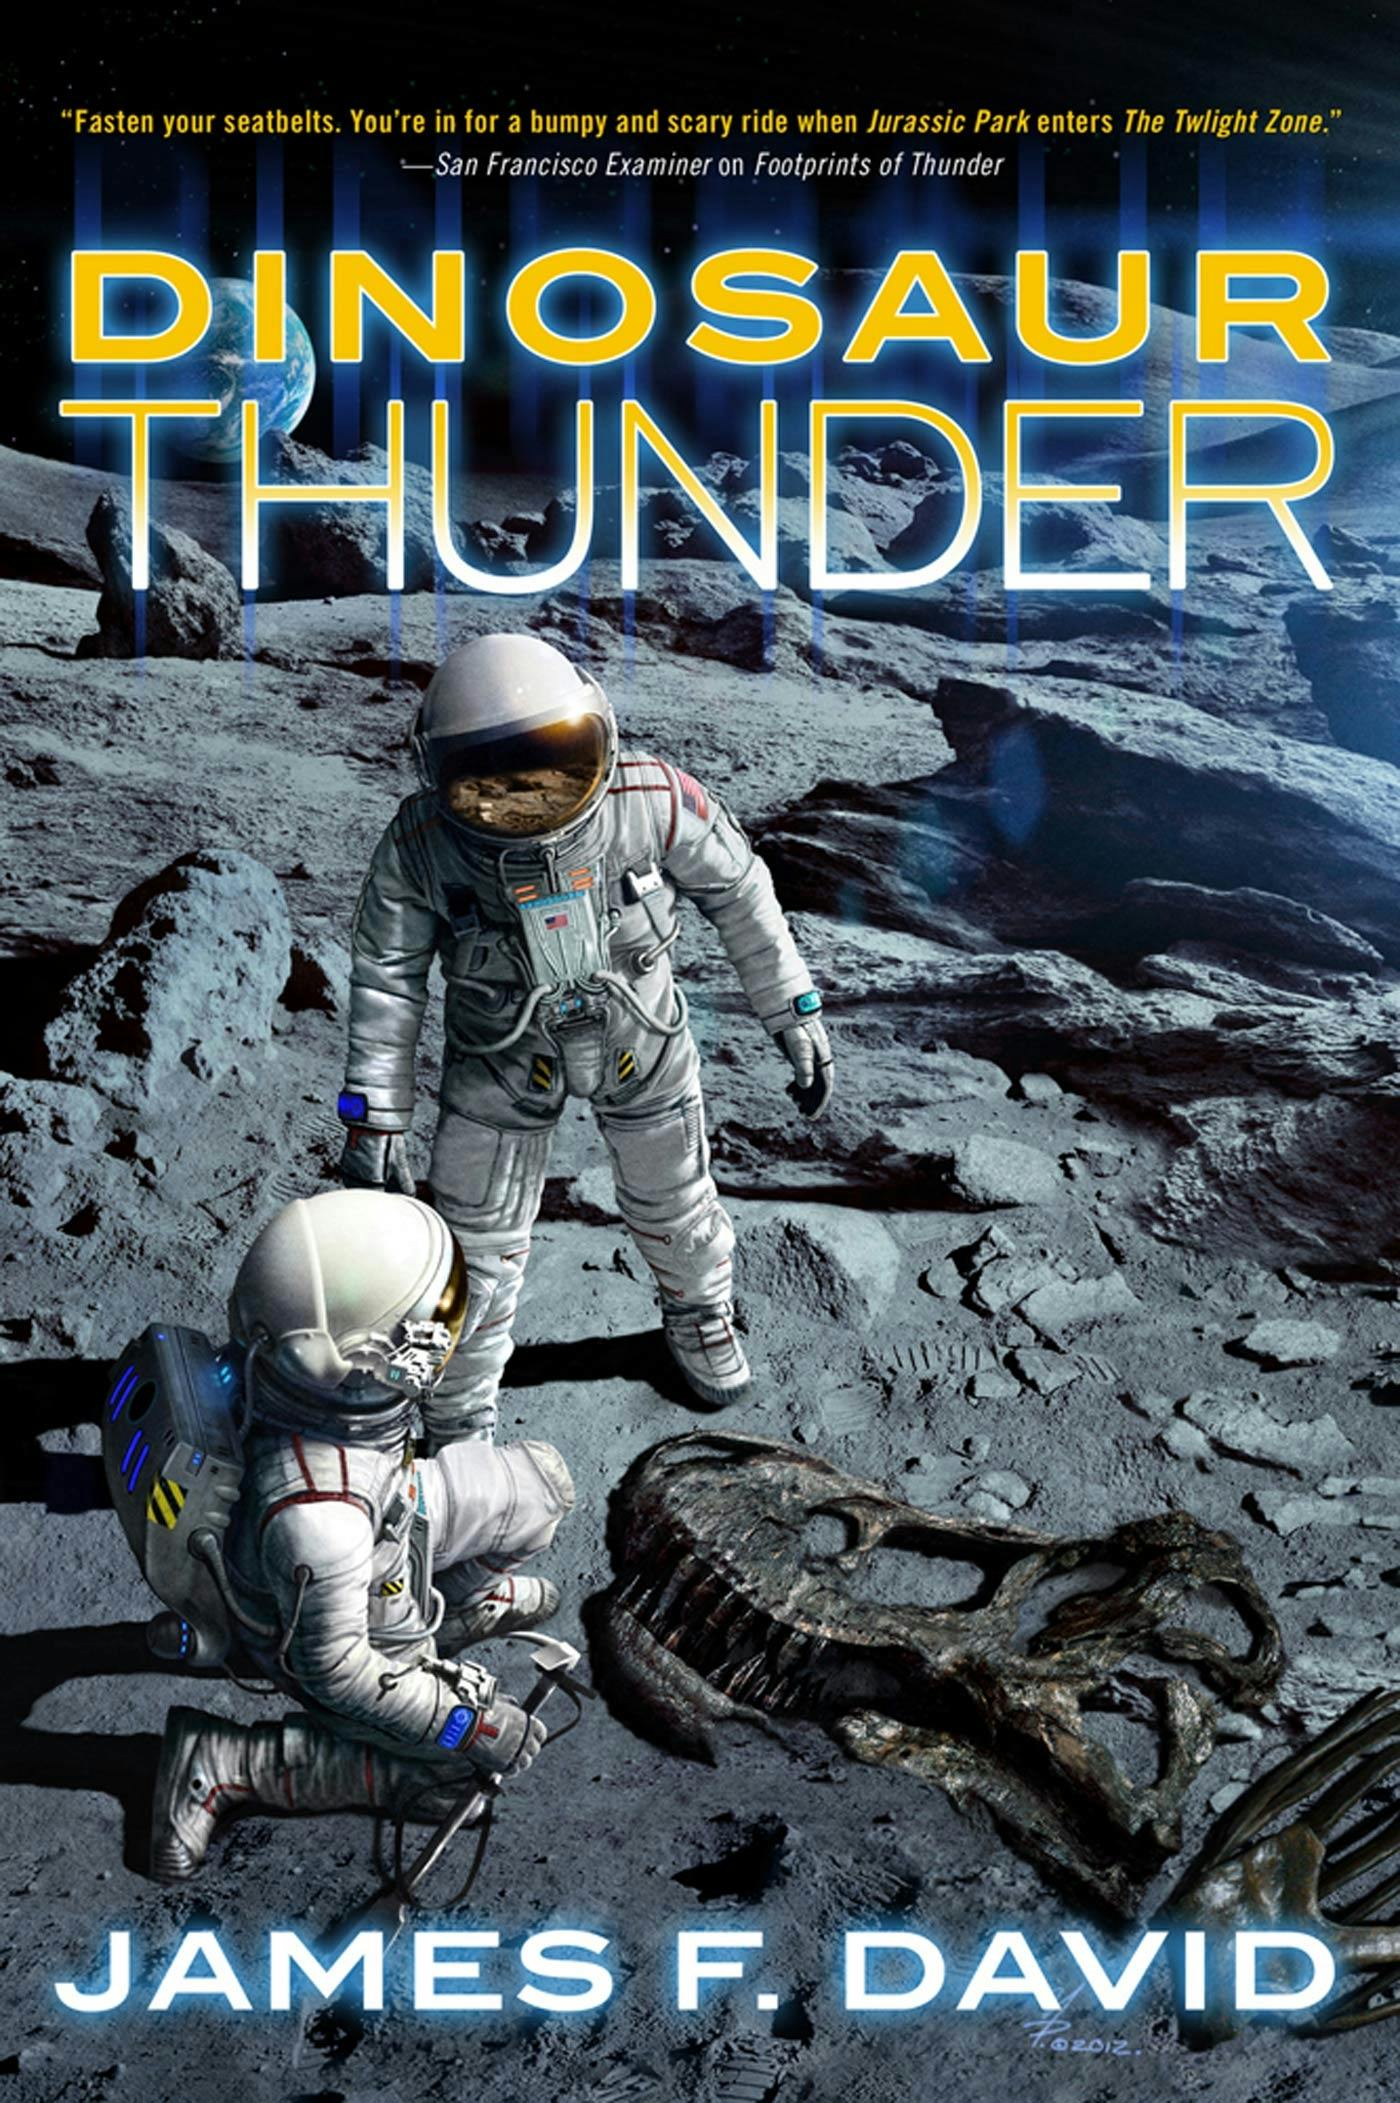 Cover for the book titled as: Dinosaur Thunder